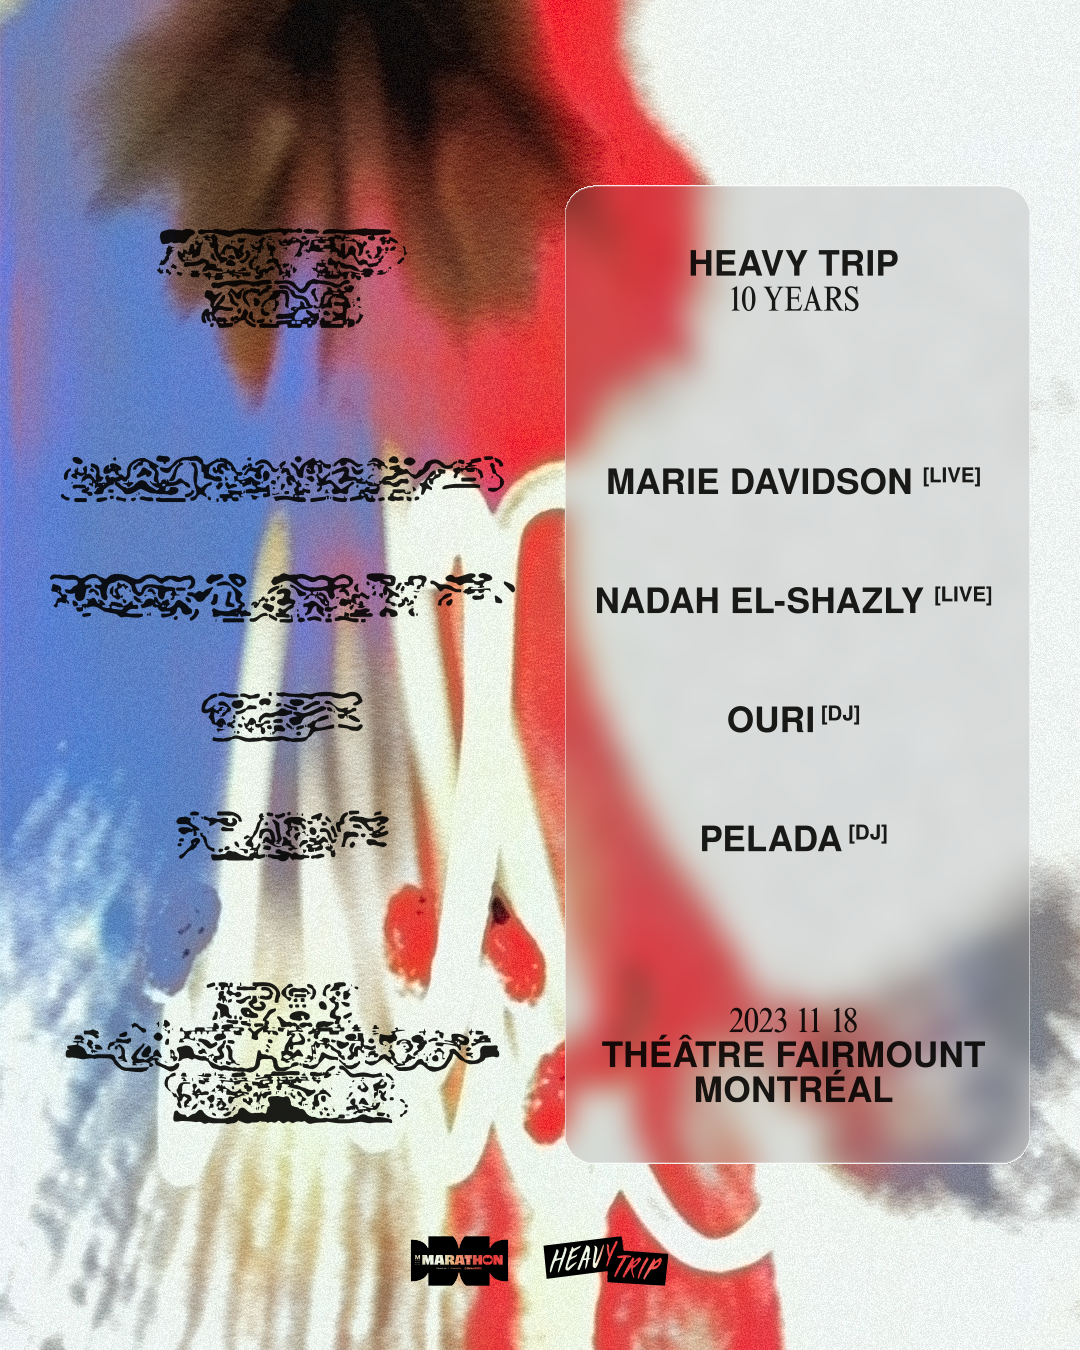 HEAVY TRIP: 10 Years of Trippin' - フライヤー表